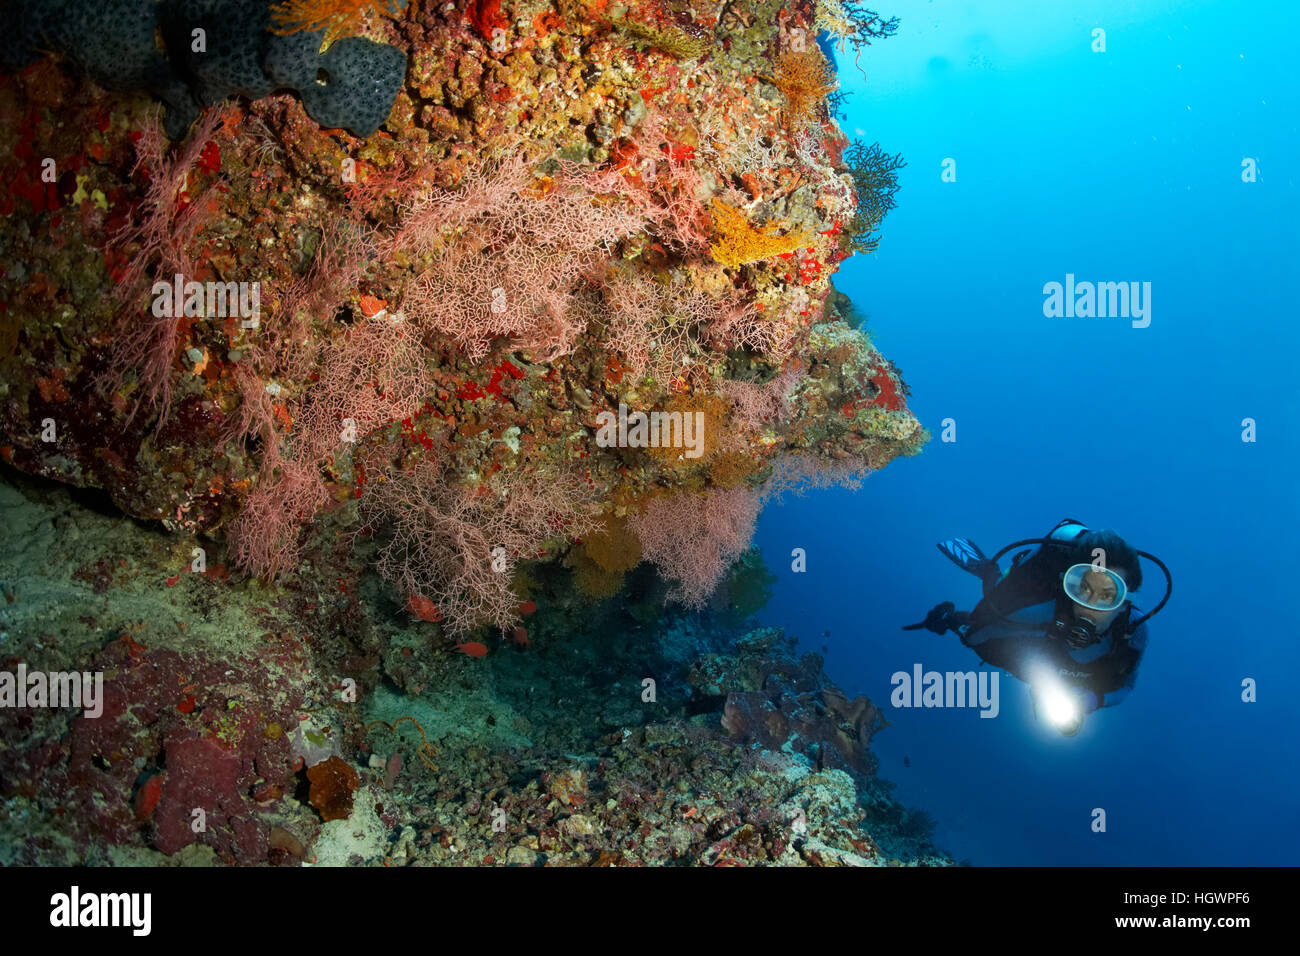 Diver viewing coral reef with sea fans (Melithaeidae) and sea squirts (Chordata), Lhaviyani Atoll, Maldives Stock Photo